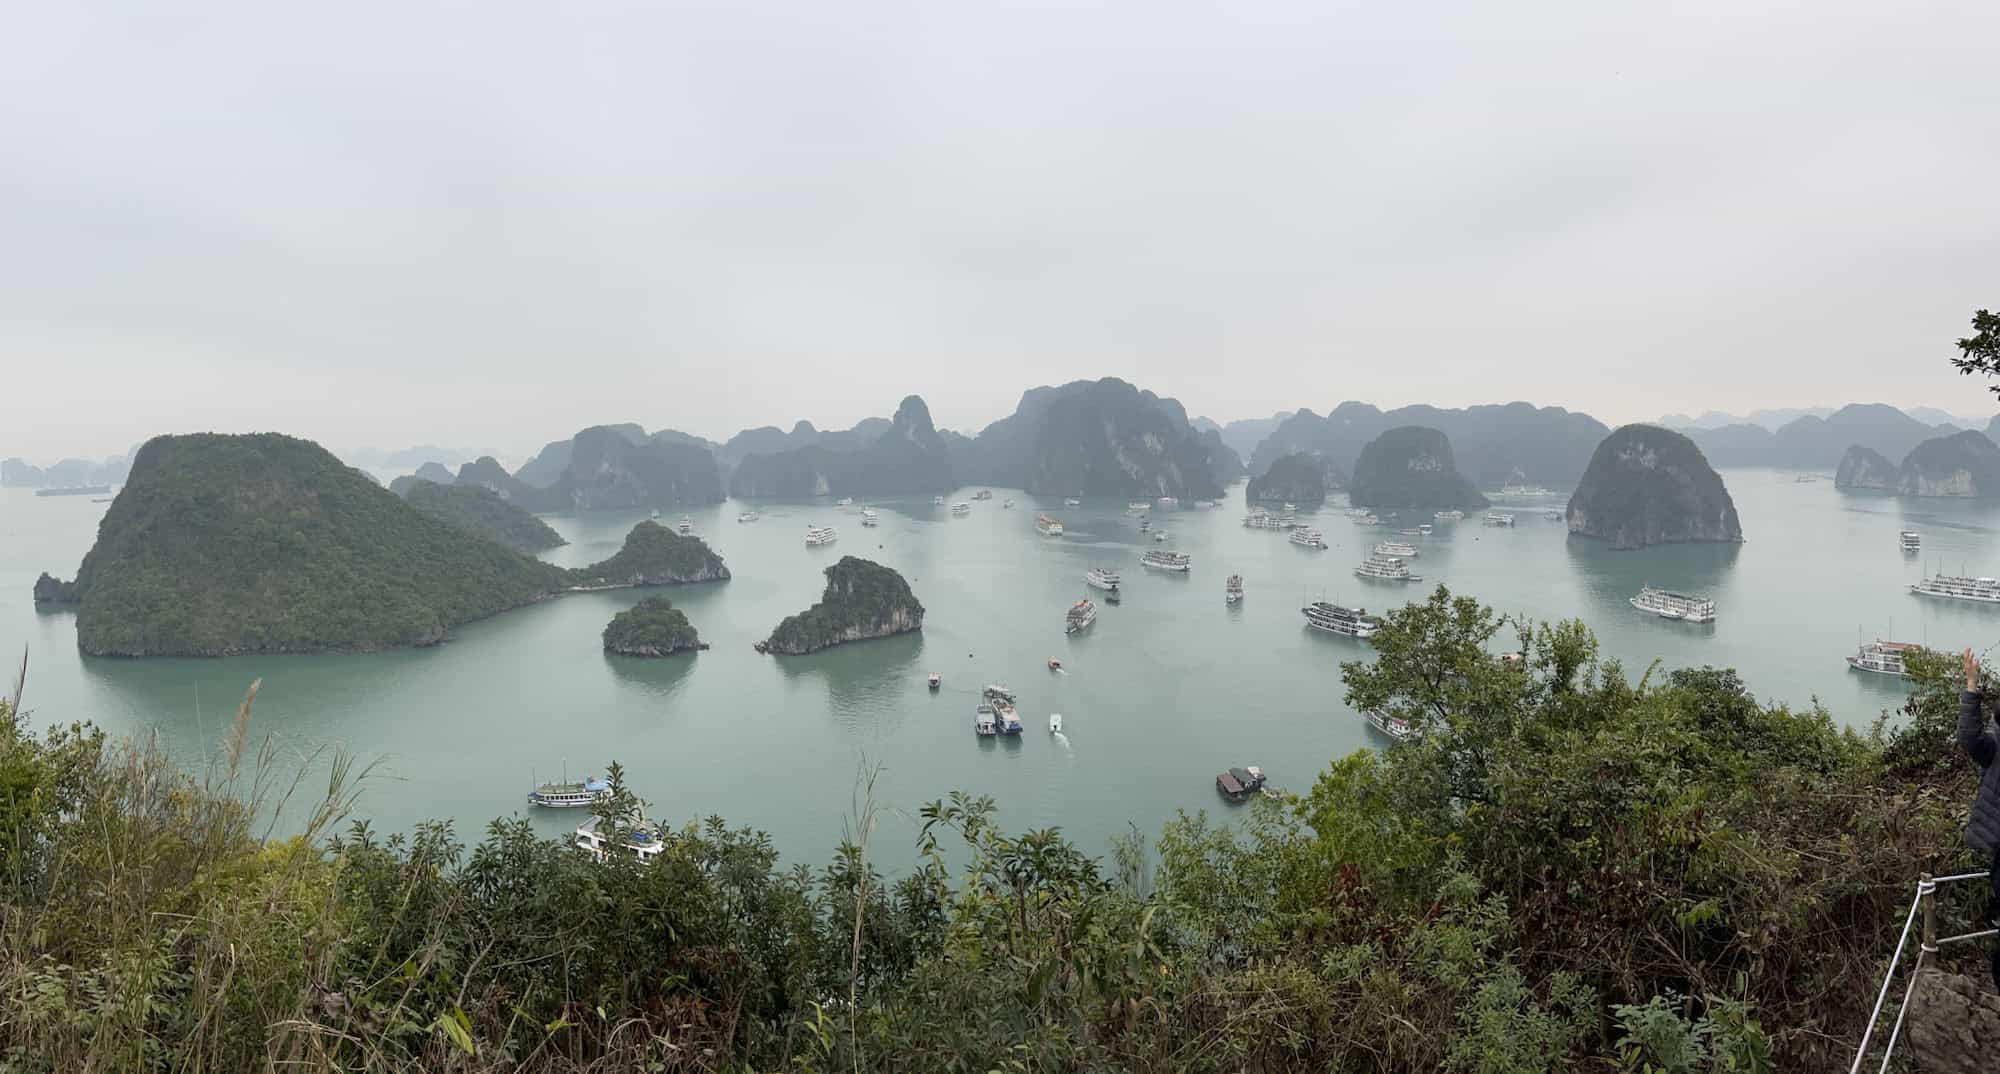 Halong Bay may feel overcrowded but beautiful views like this make it worth a visit